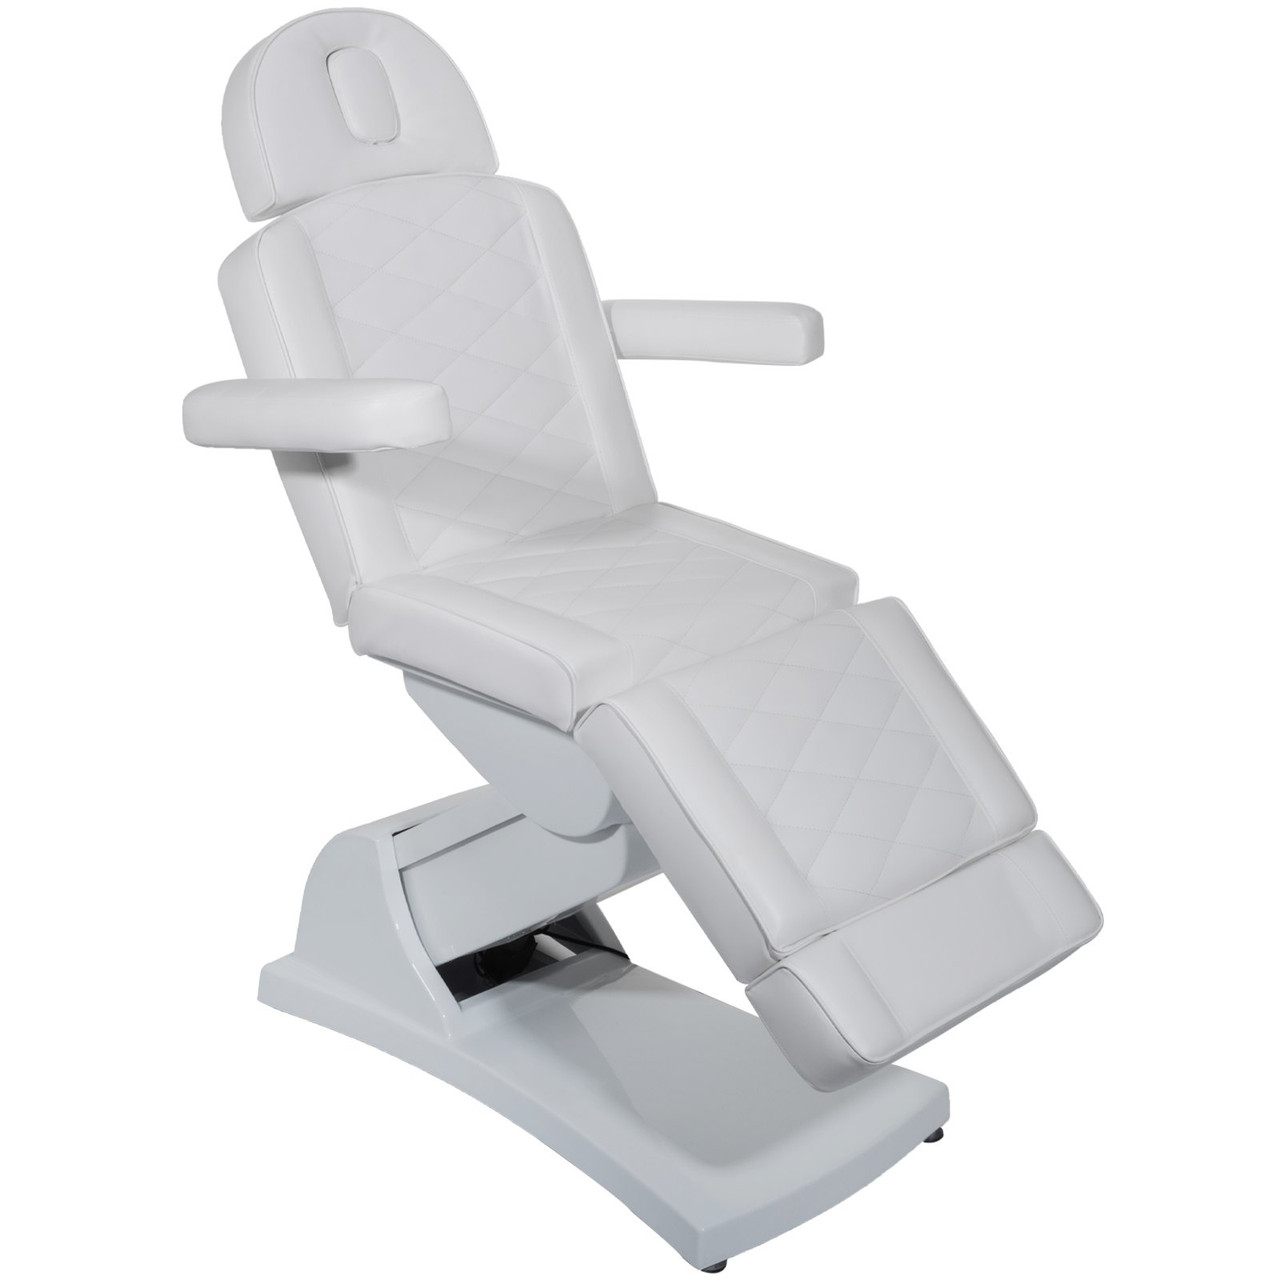 VEVOR 4 Motors Electric Facial Chair Full Electrical Massage Table Dental Bed Aesthetic Adjustable Reclining Chair for Podiatry Tattoo Spa Salon All Purpose Bed Chair ?4-Motor, White2?